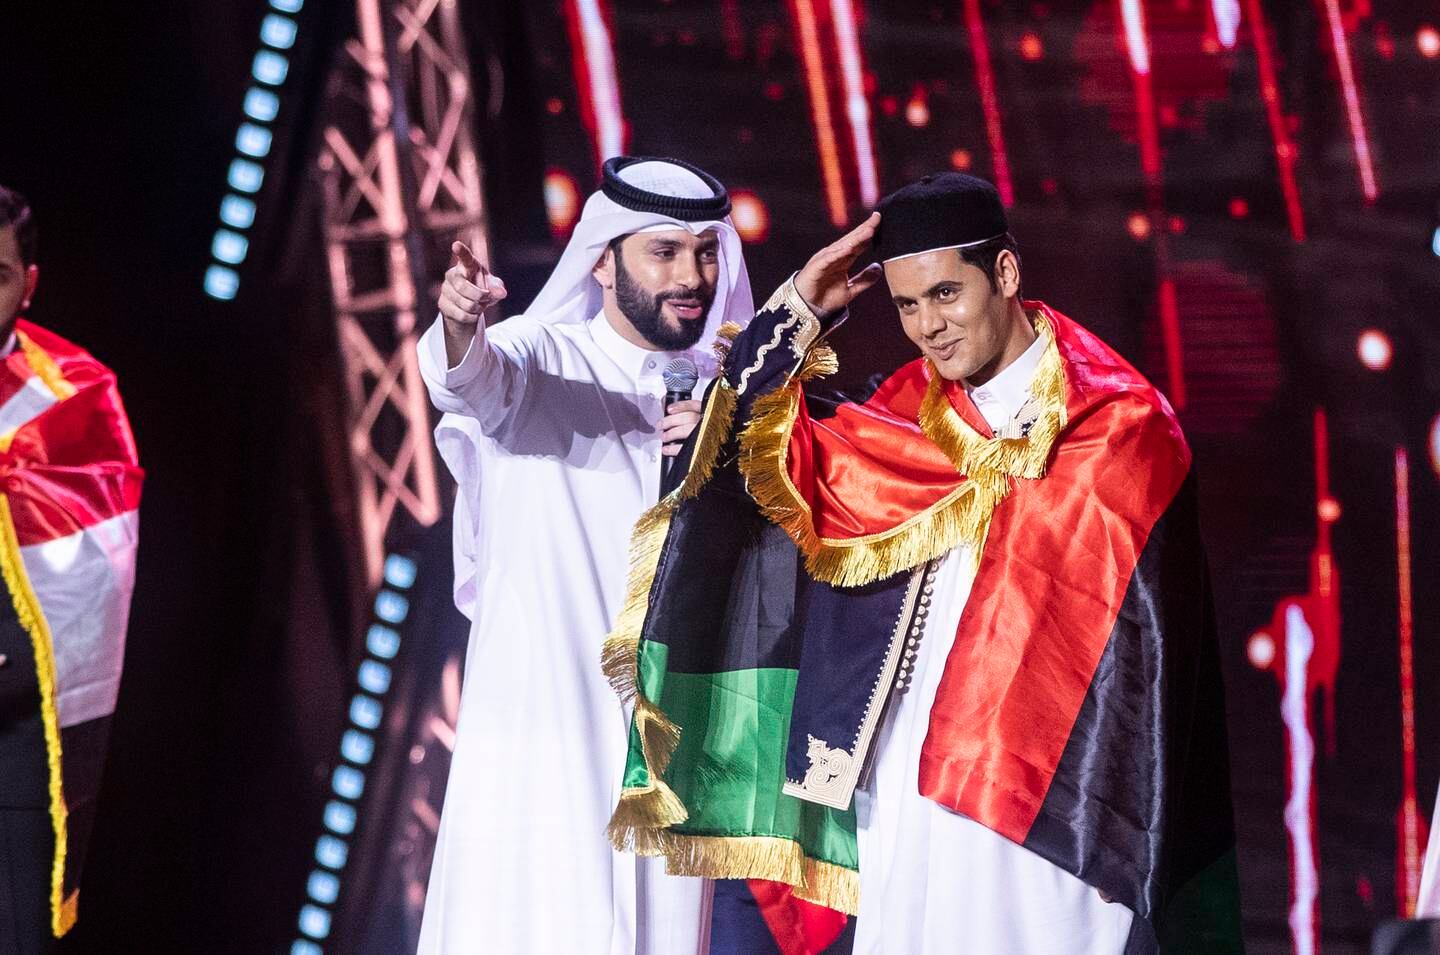 Third prize winner Muhammad Al Wafi Idris from Libya at the finals of the 14th Munshid Al Sharjah. Ruel Pableo for The National